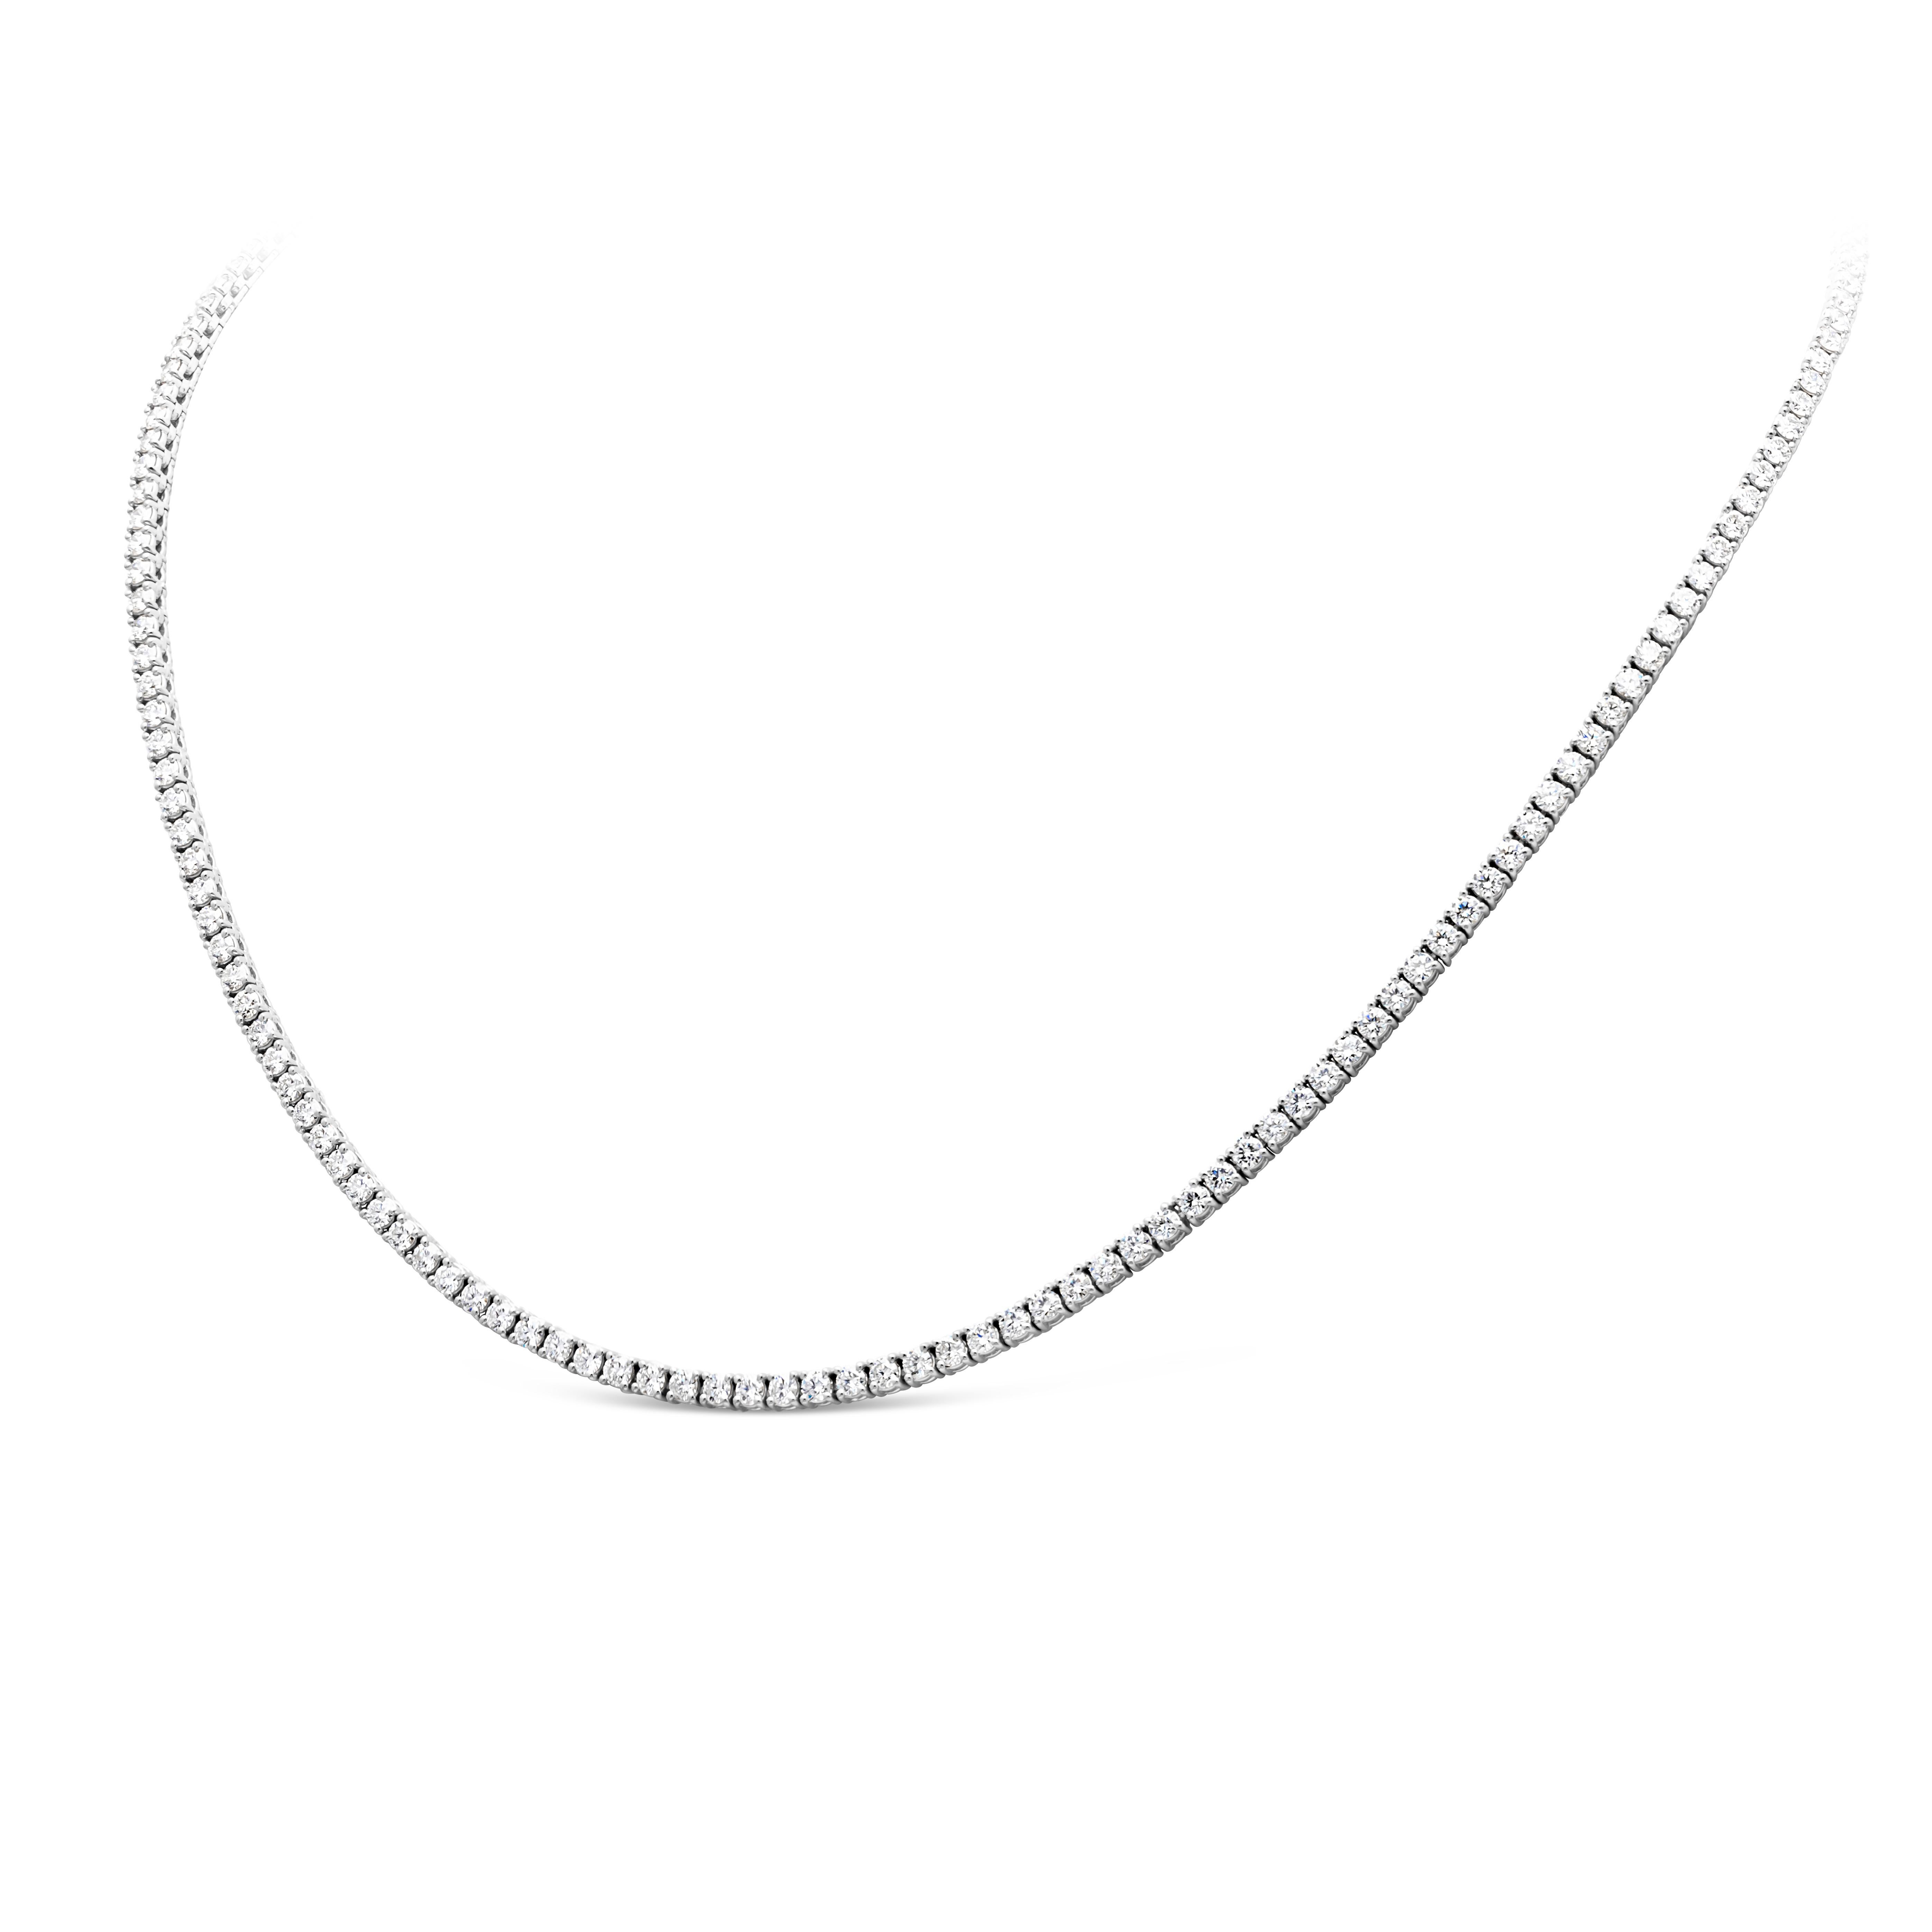 A classic and timeless tennis necklace showcasing a row of graduating 167 brilliant round shape diamonds weighing 6.85 carats total, F color and SI in clarity. Beautifully set in a four prong 14K White Gold setting and 17 inches in Length.

Roman